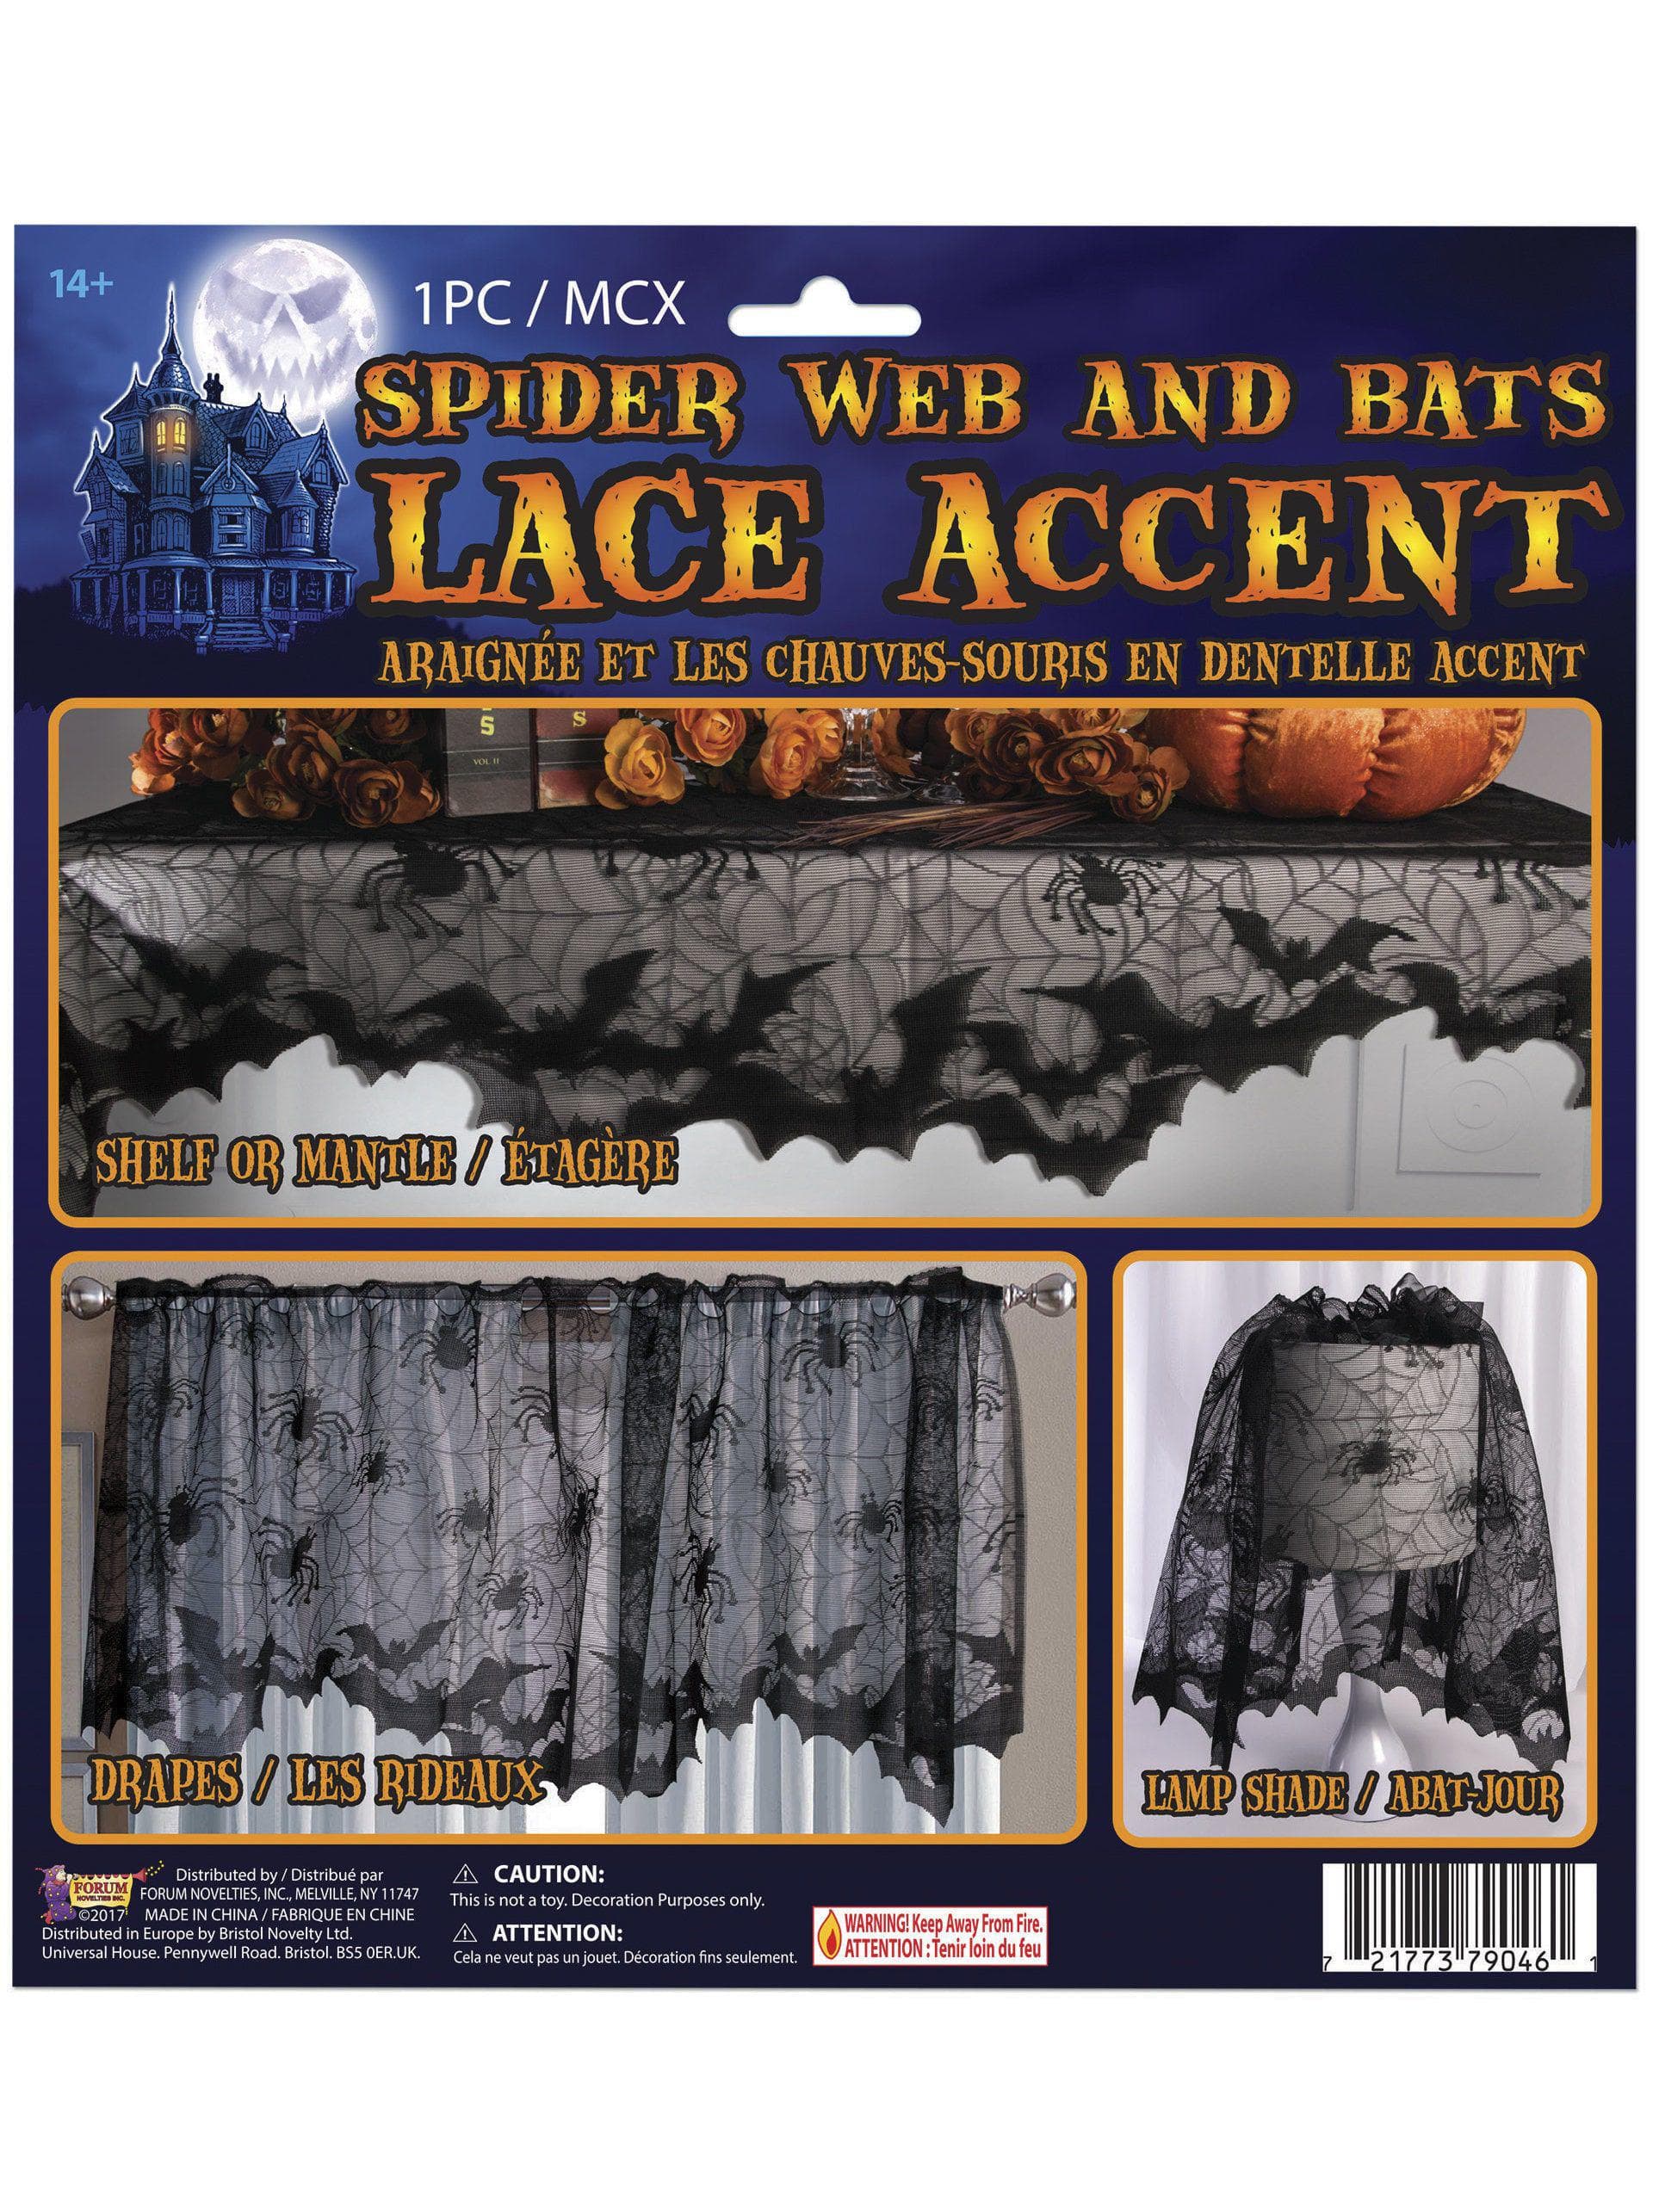 Spider Web and Bat Lace Accent - costumes.com